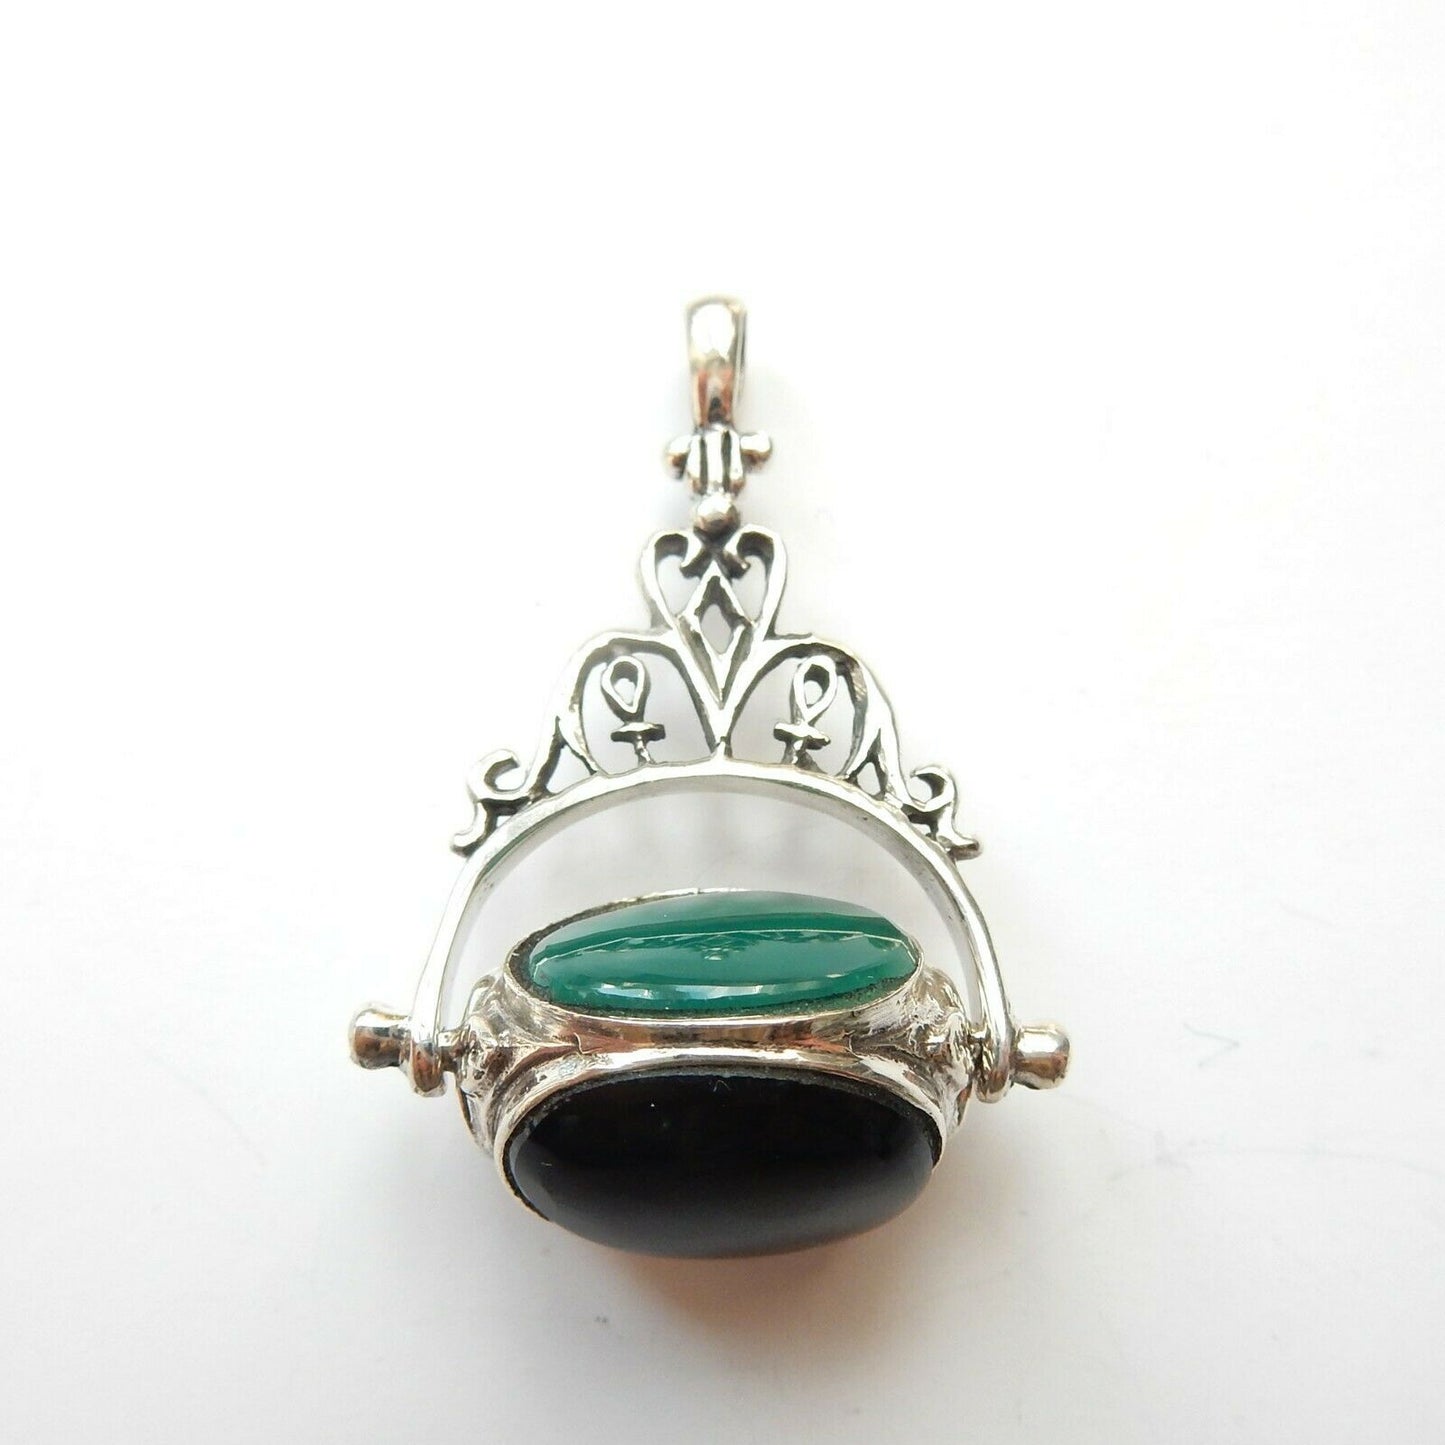 Vintage Sterling Silver Onyx Agate Carnelian Spinning Fob Pendant